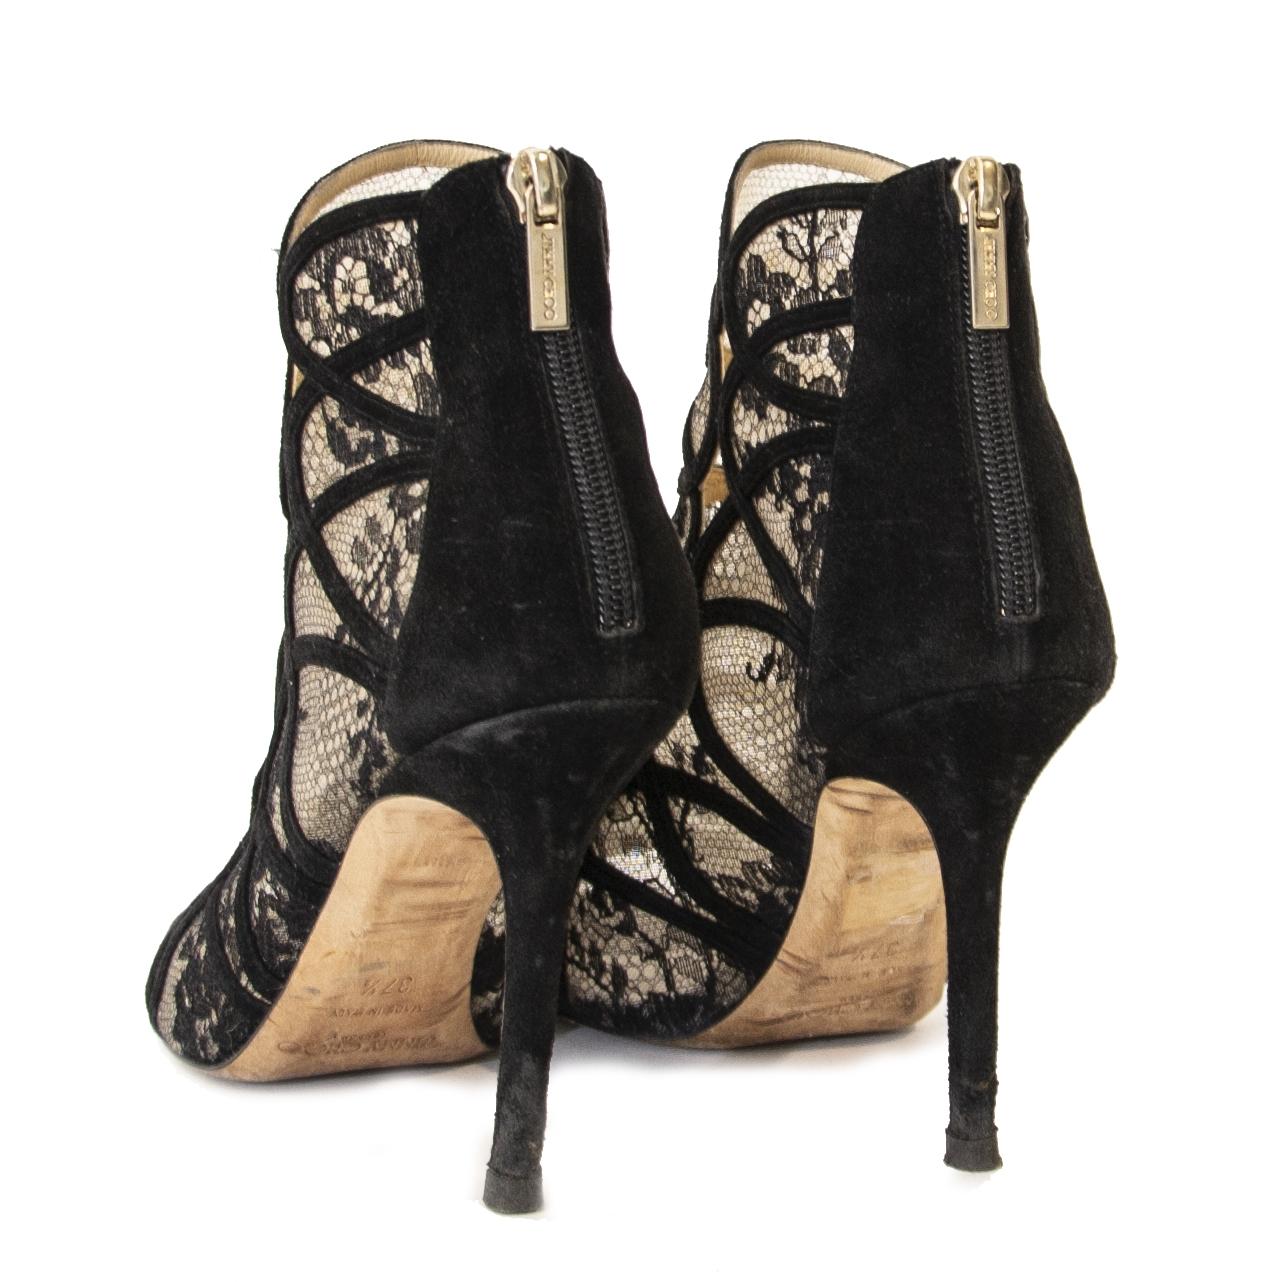 In good preloved condition

Jimmy Choo Black Lace Peeptoe Heels - Size 37 1/2

Nothing says sexy elegance like these peeptoe lace heels of Jimmy Choo. These heels are perfect for a night out or for a sexy date.

Style them with a cute dress and